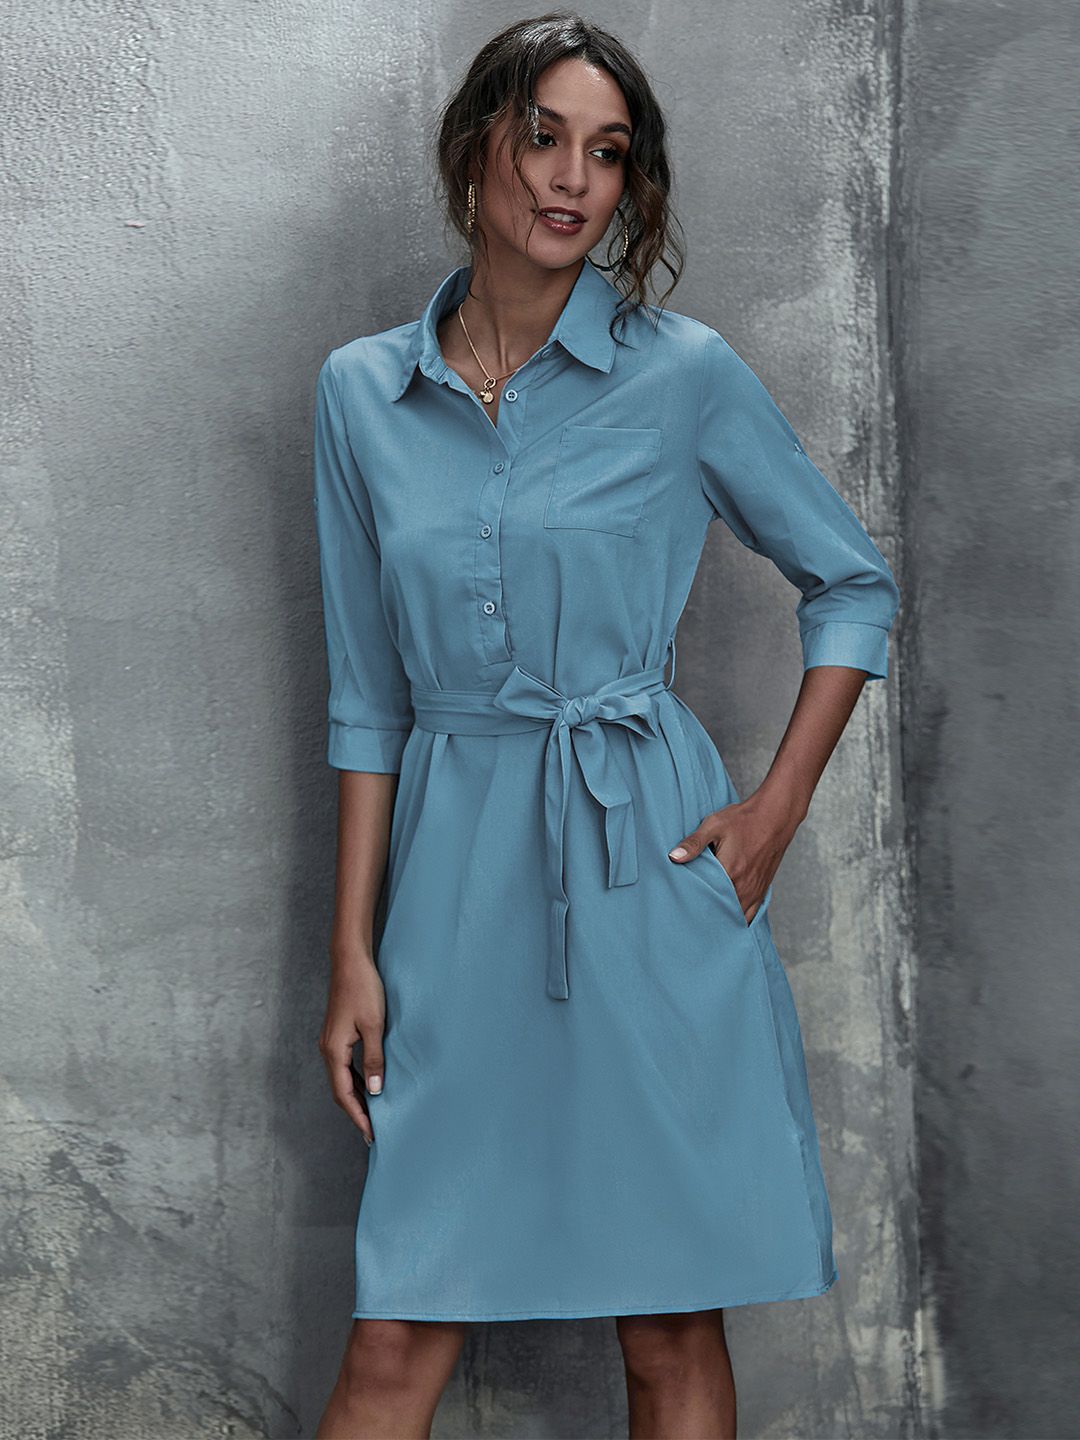 URBANIC Blue Solid Shirt Dress with Belt Price in India